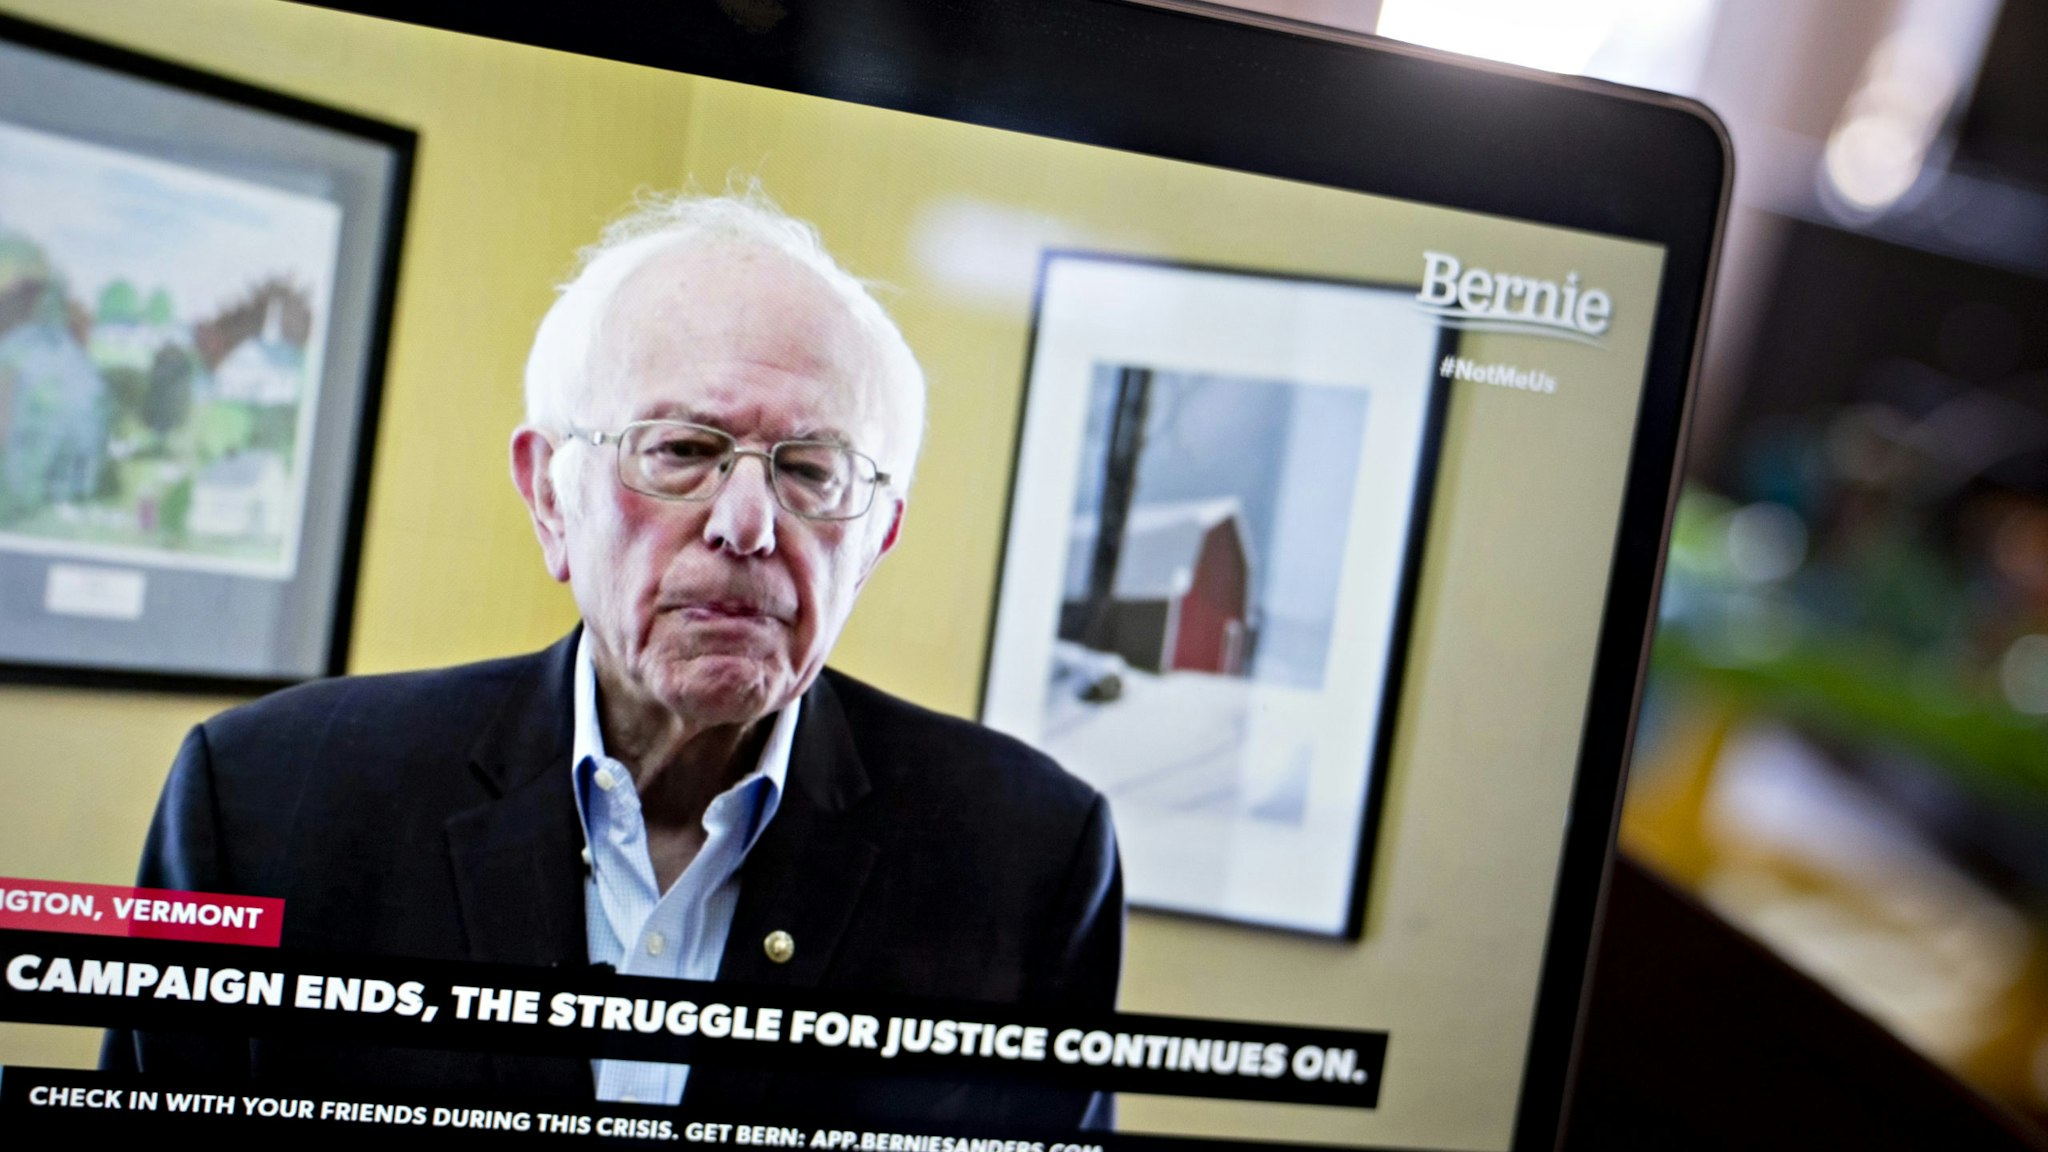 Senator Bernie Sanders, an Independent from Vermont and former 2020 presidential candidate, pauses while speaking during a livestream event on a laptop computer in this arranged photograph in Arlington, Virginia, U.S., on Wednesday, April 8, 2020. Sanders ended his presidential run today after an unbroken string of losses in recent weeks that cemented Joe Biden's all-but insurmountable lead in delegates. Photographer: Andrew Harrer/Bloomberg via Getty Images